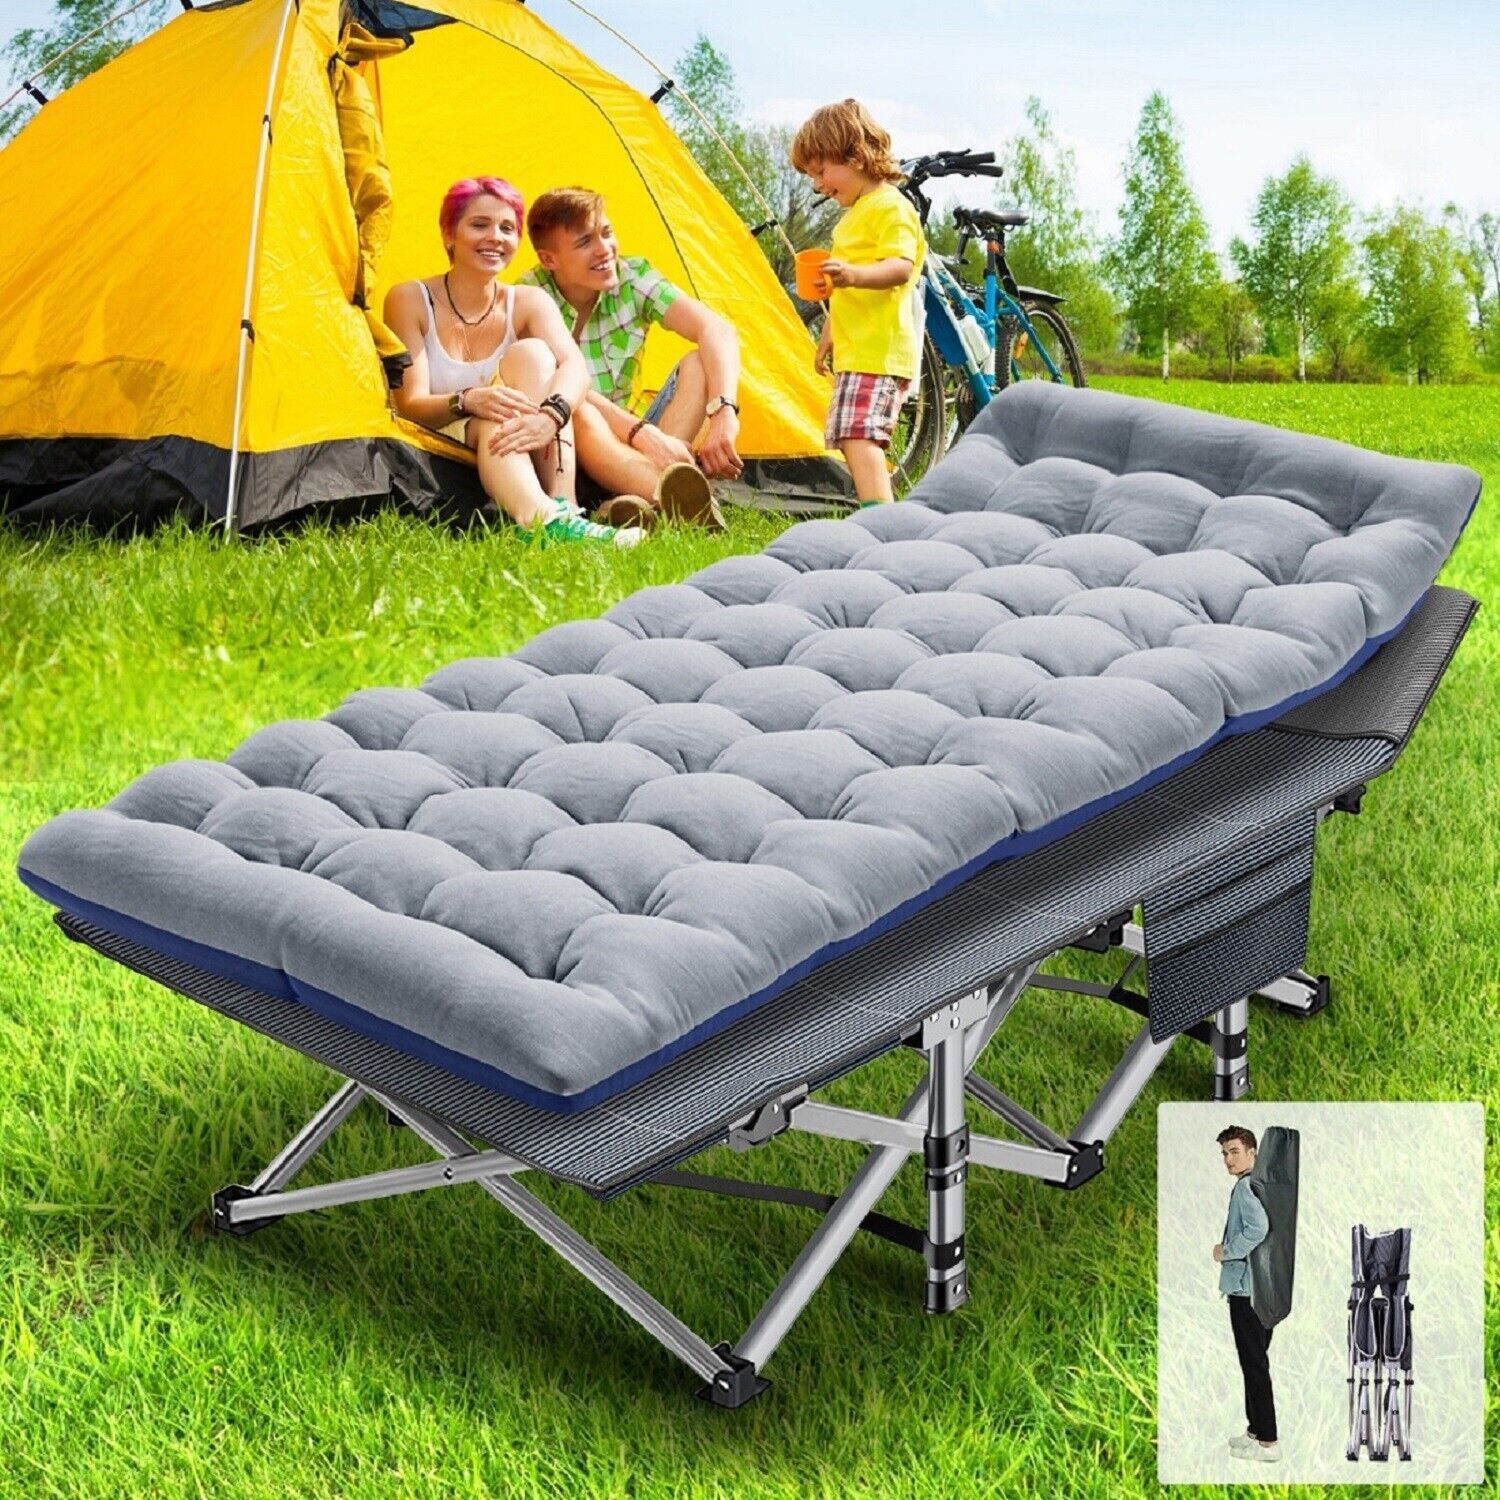 Folding Camping Cot Guest Sleeping Bed w/Mattress&Carry Bag Foldable Cots